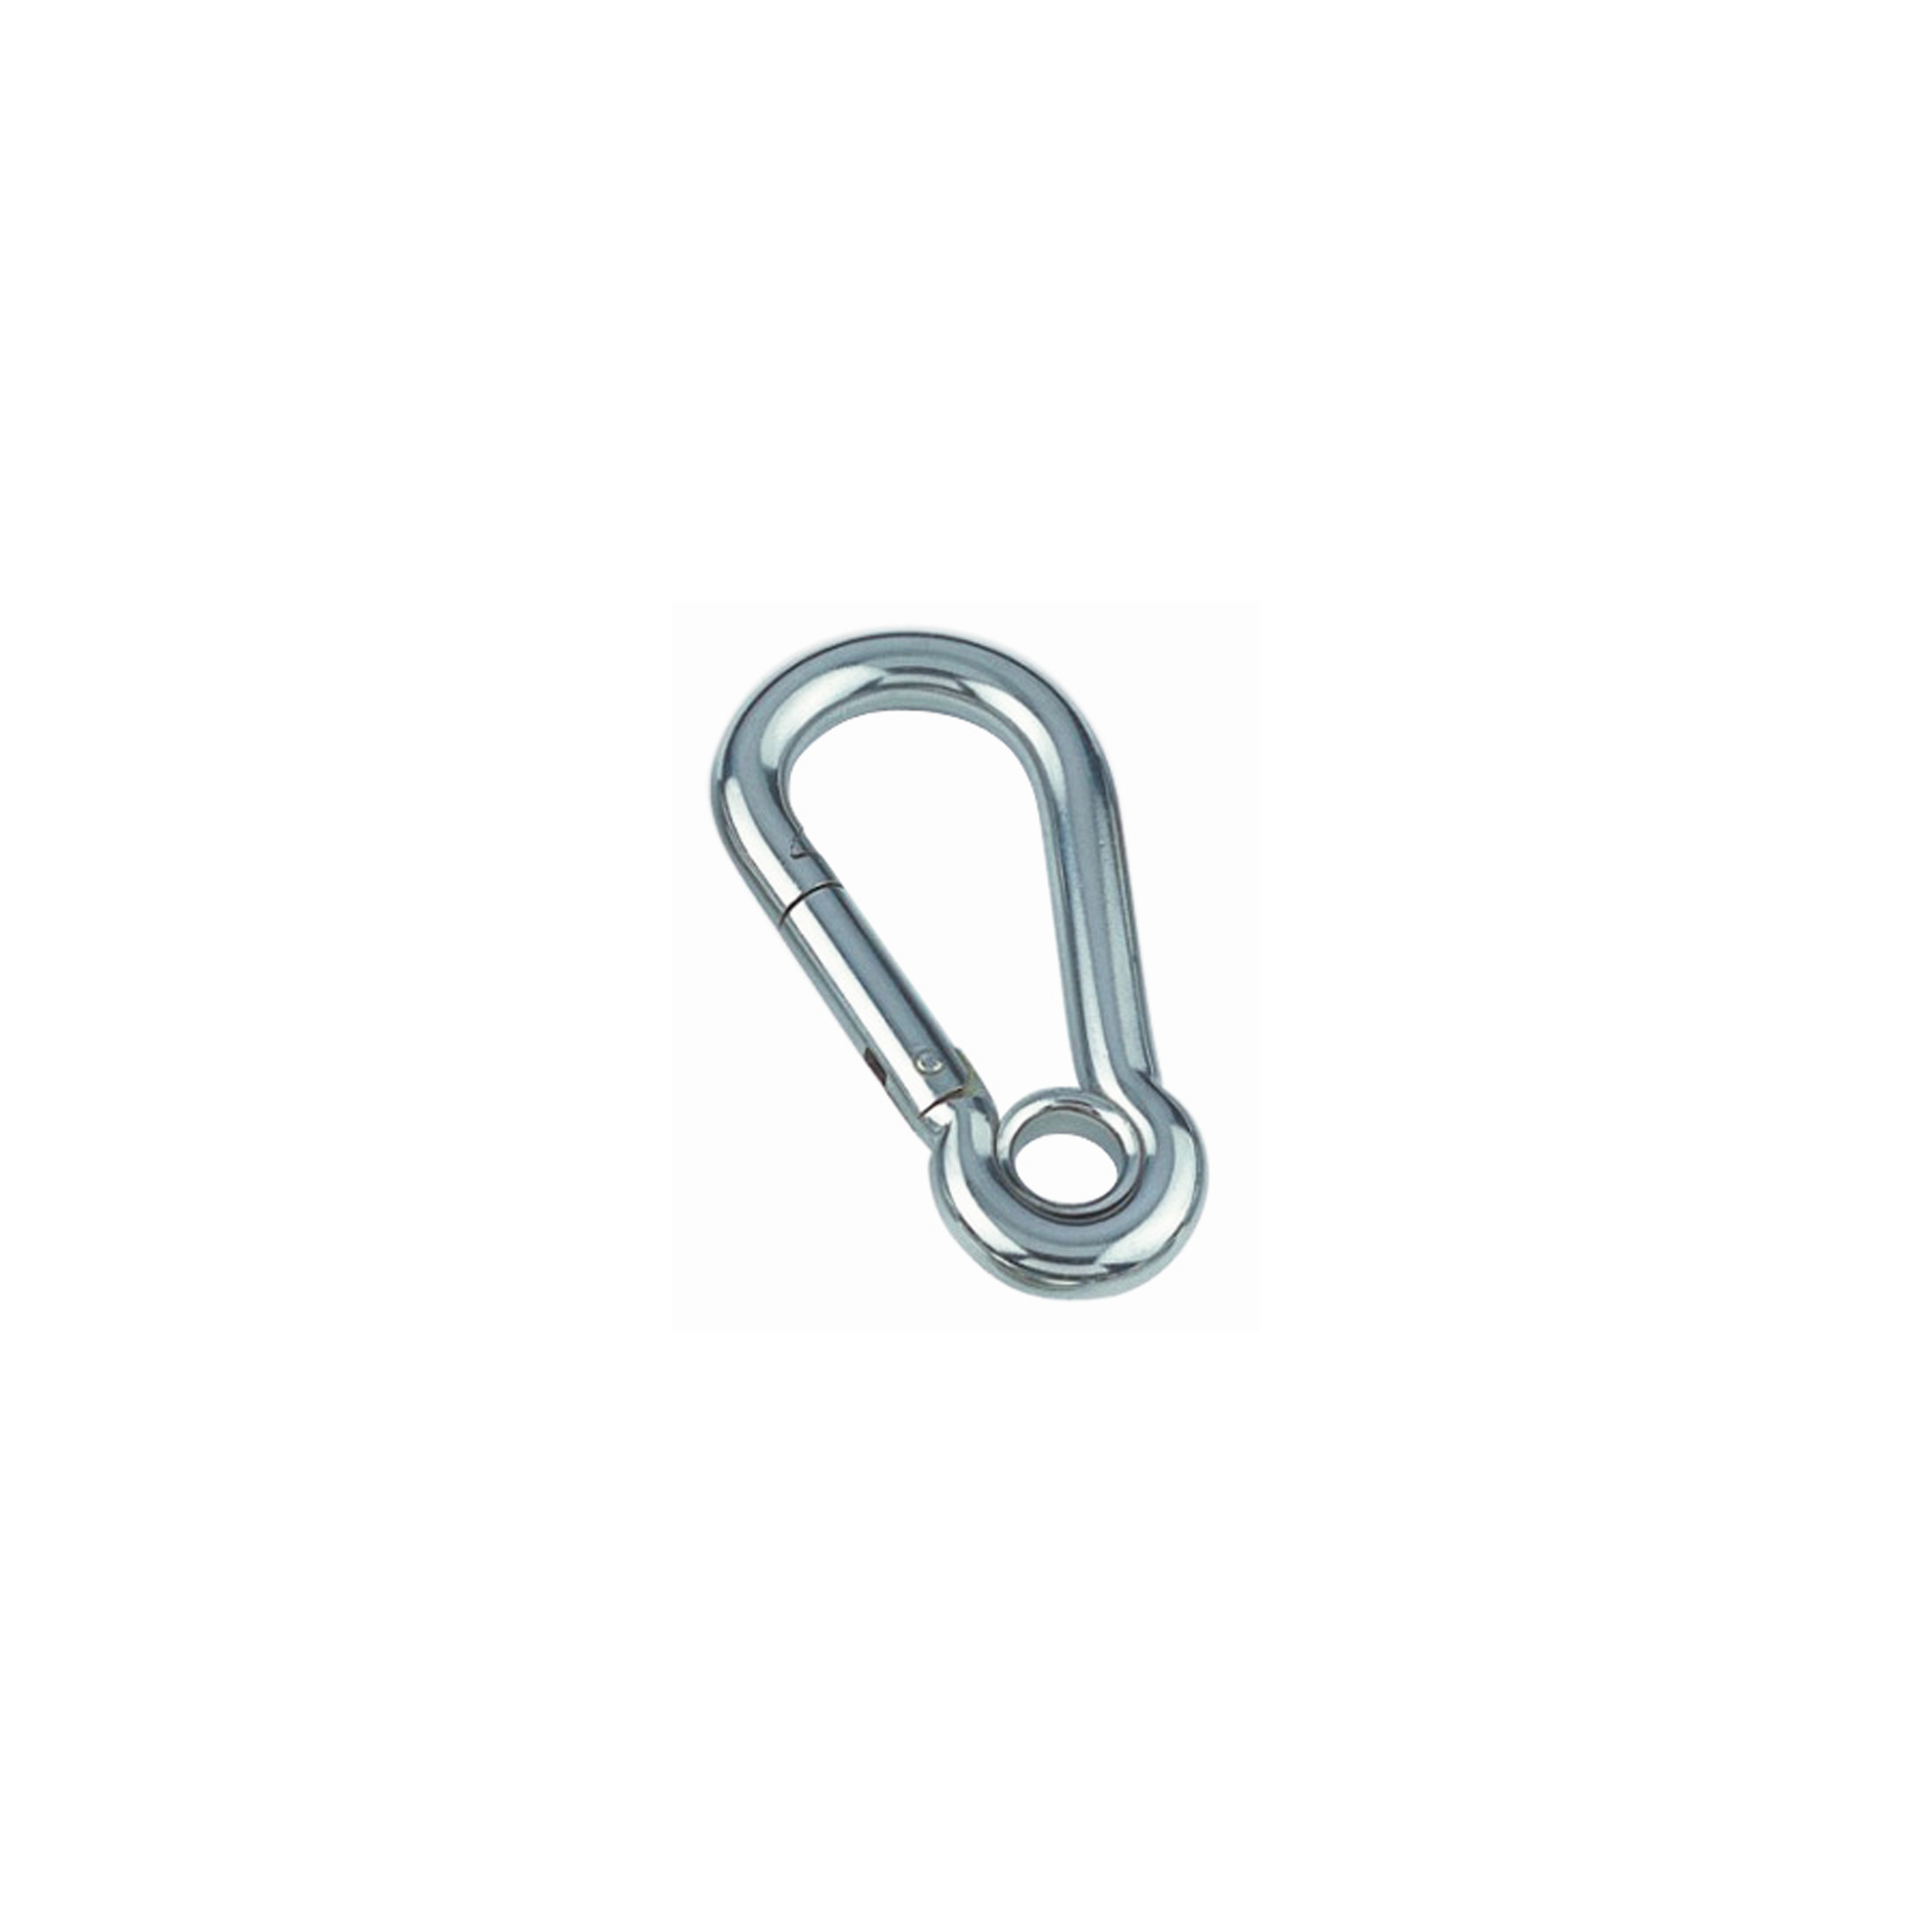 10 STCK / PCS. Spring hook with eyelet A4  4x40mm